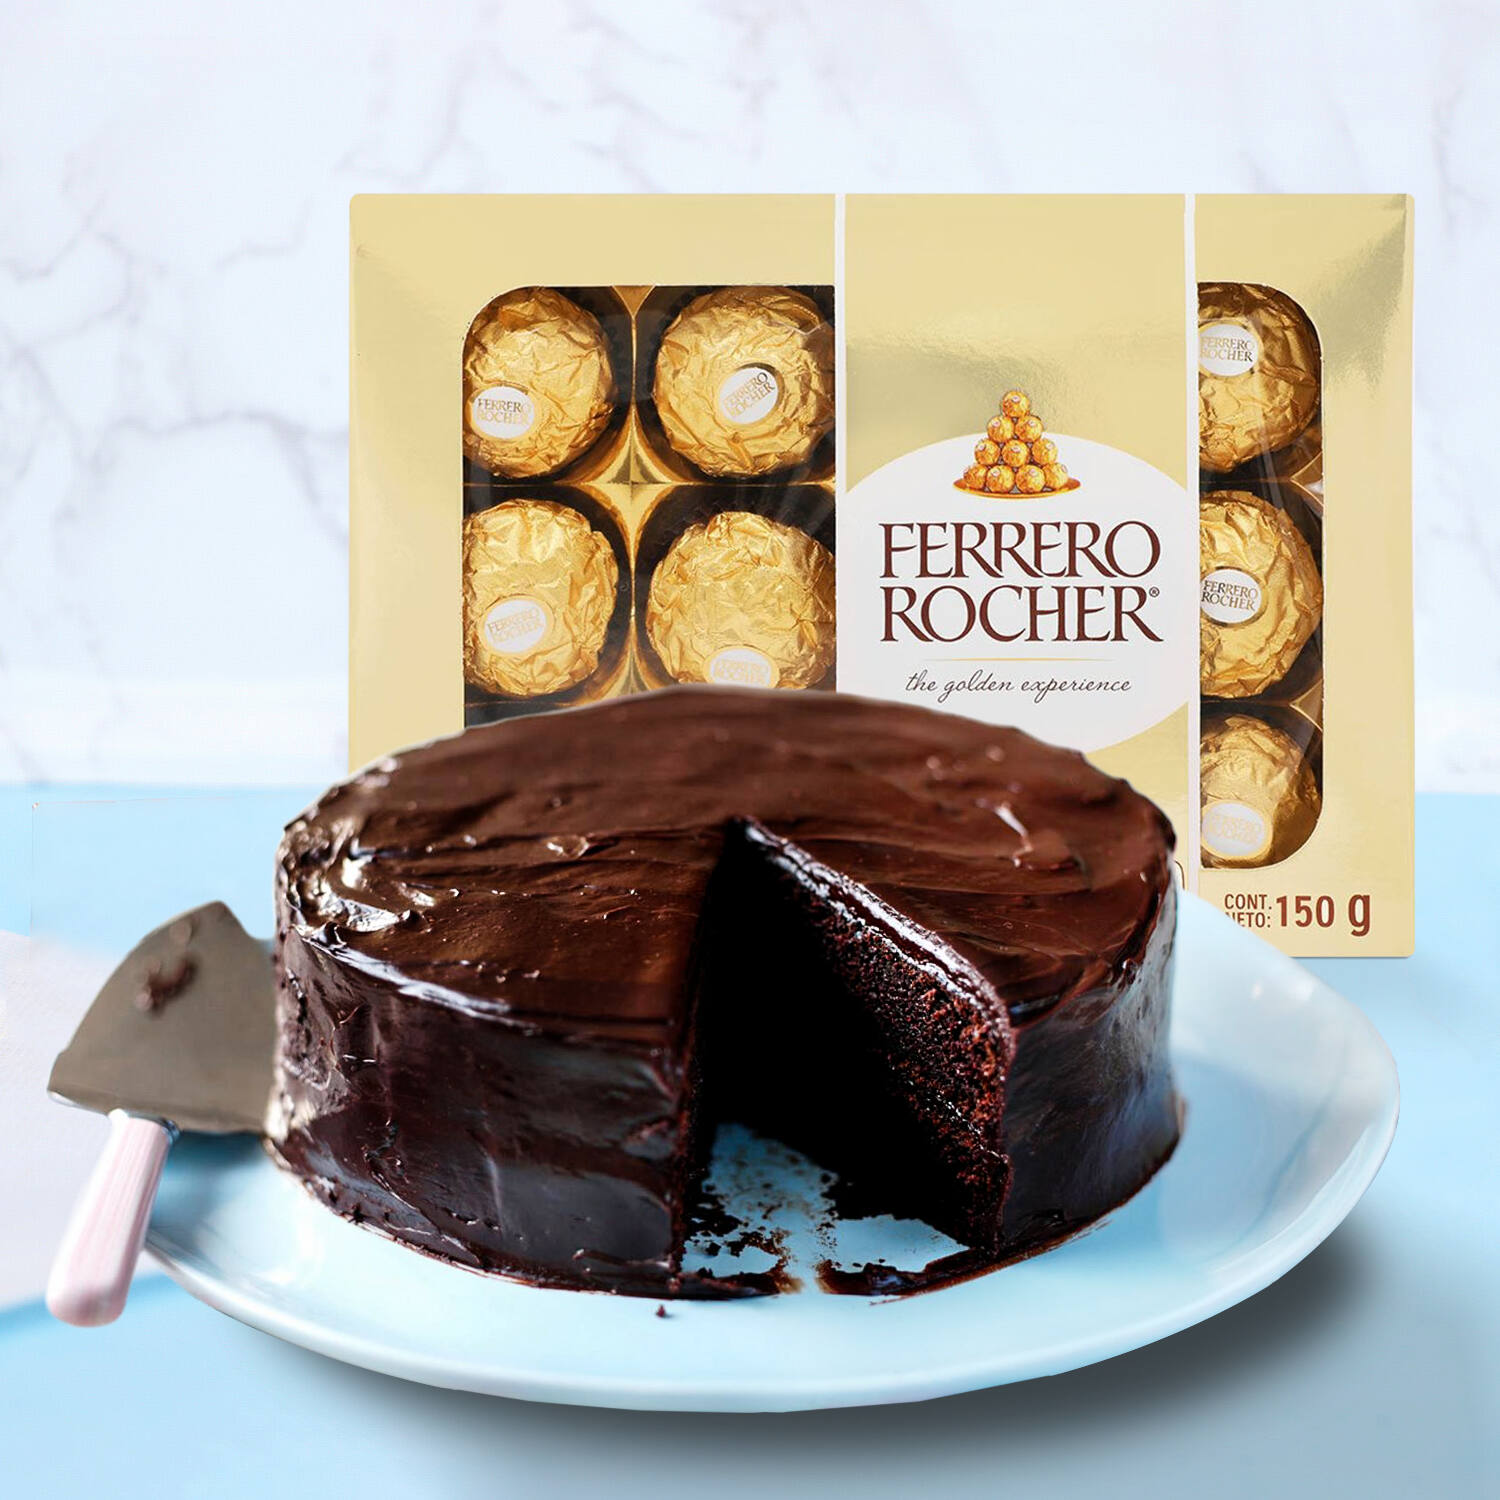 Buy Chocolate Cake Online - Send Gifts from USA, UK, Canada